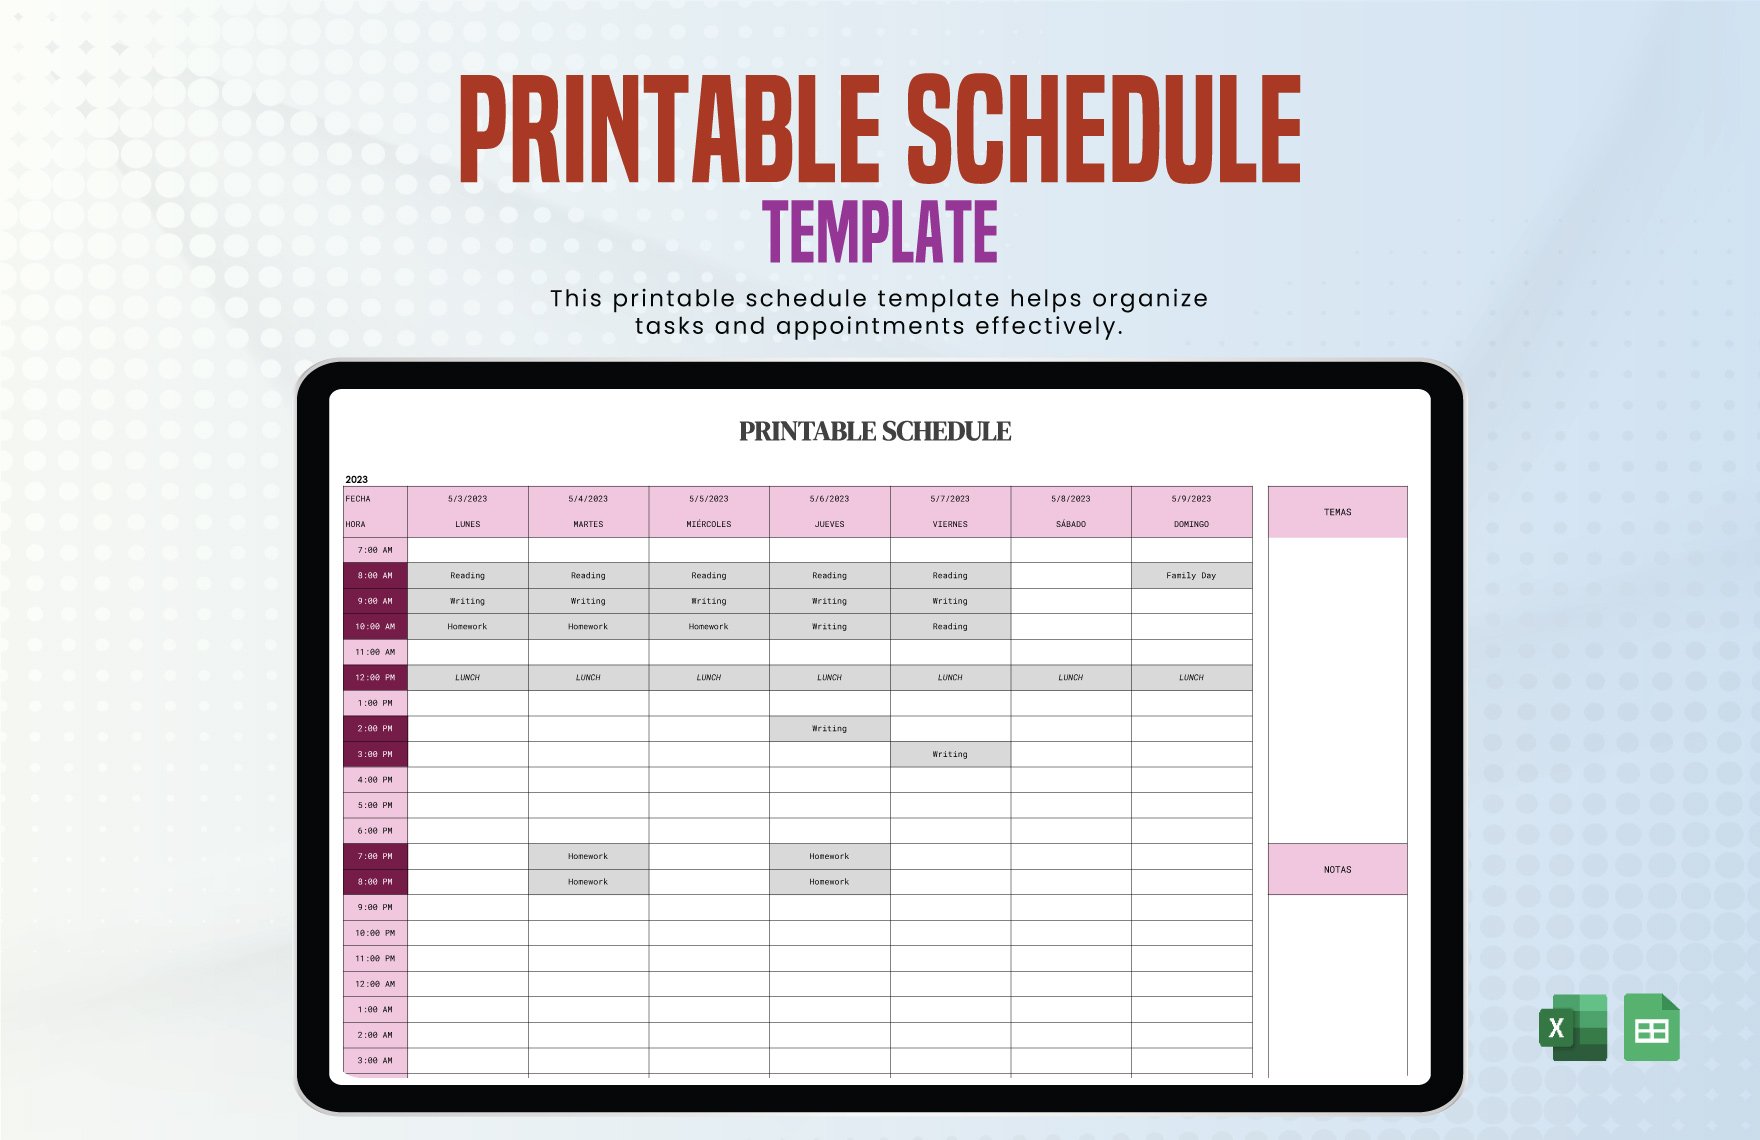 Free Printable Schedule in Excel, Google Sheets